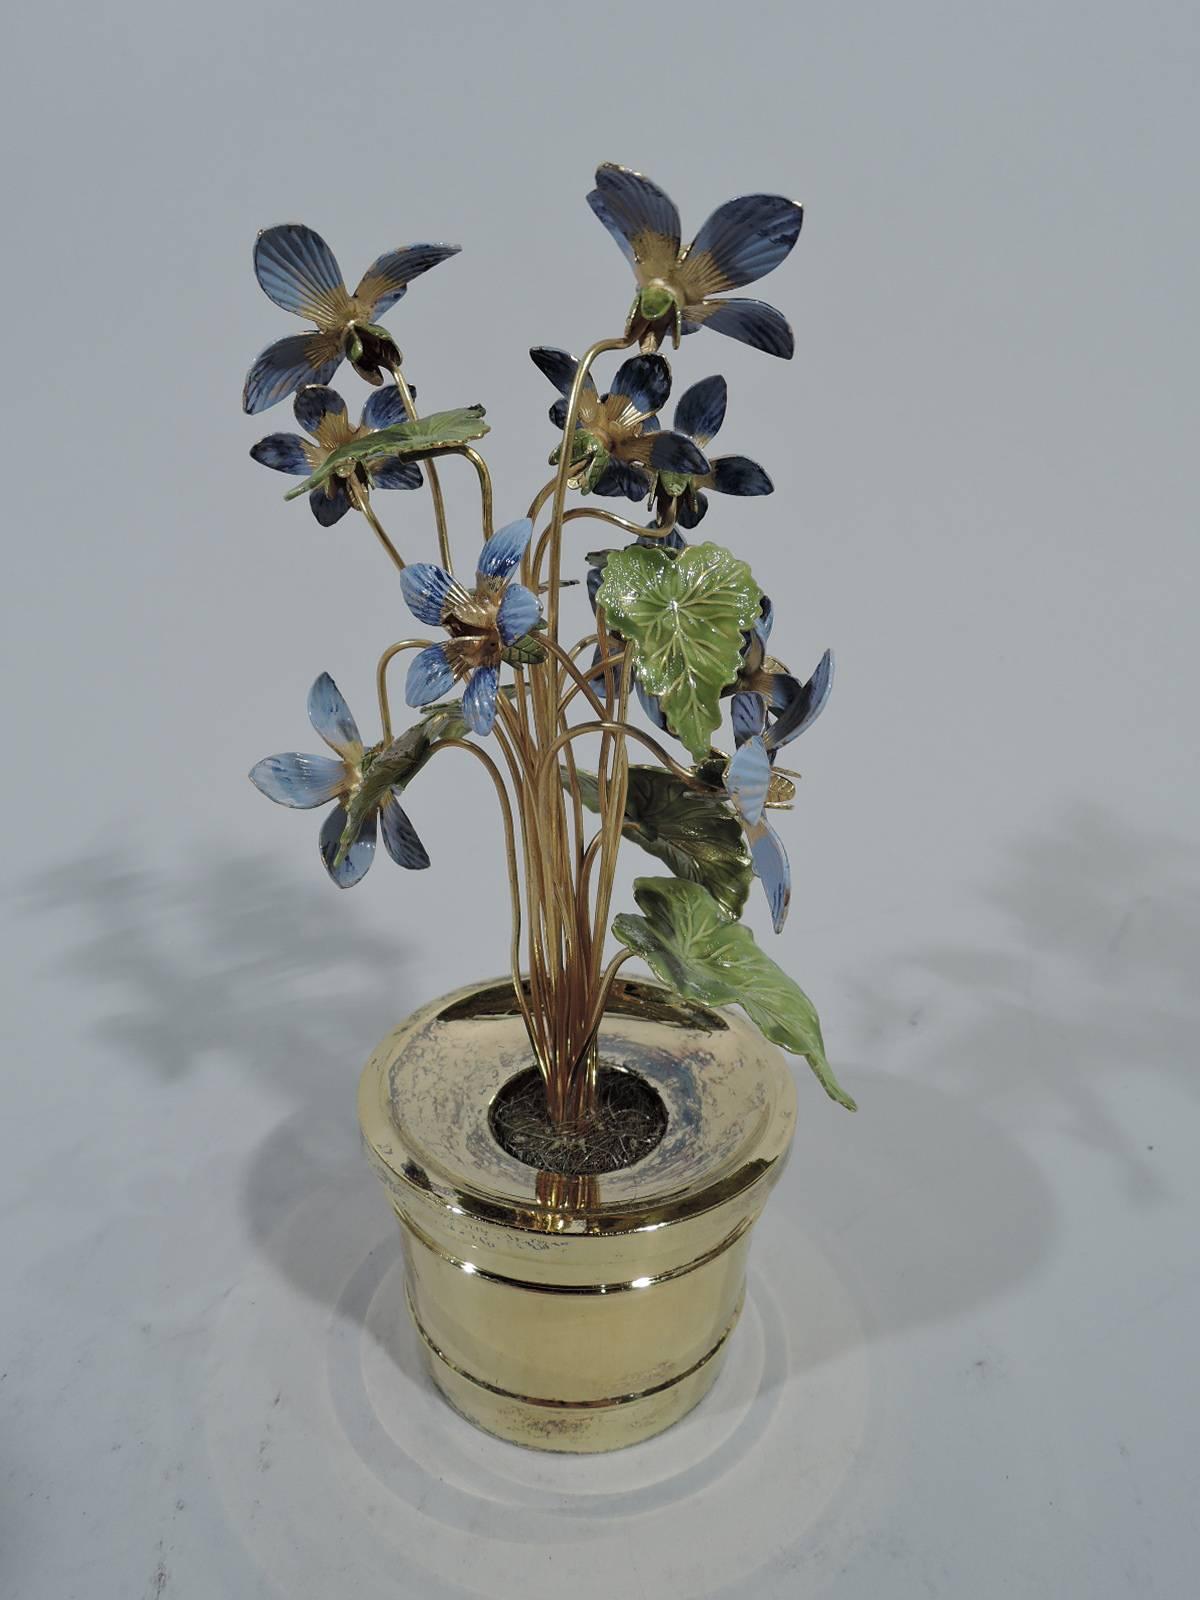 Gilt and enameled sterling silver flowerpot. Made by Gorham in Providence. A pretty novelty in form of gilt-stemmed violets with shaded-purple petals and green leaves planted in a gilt pot. Hallmarked.